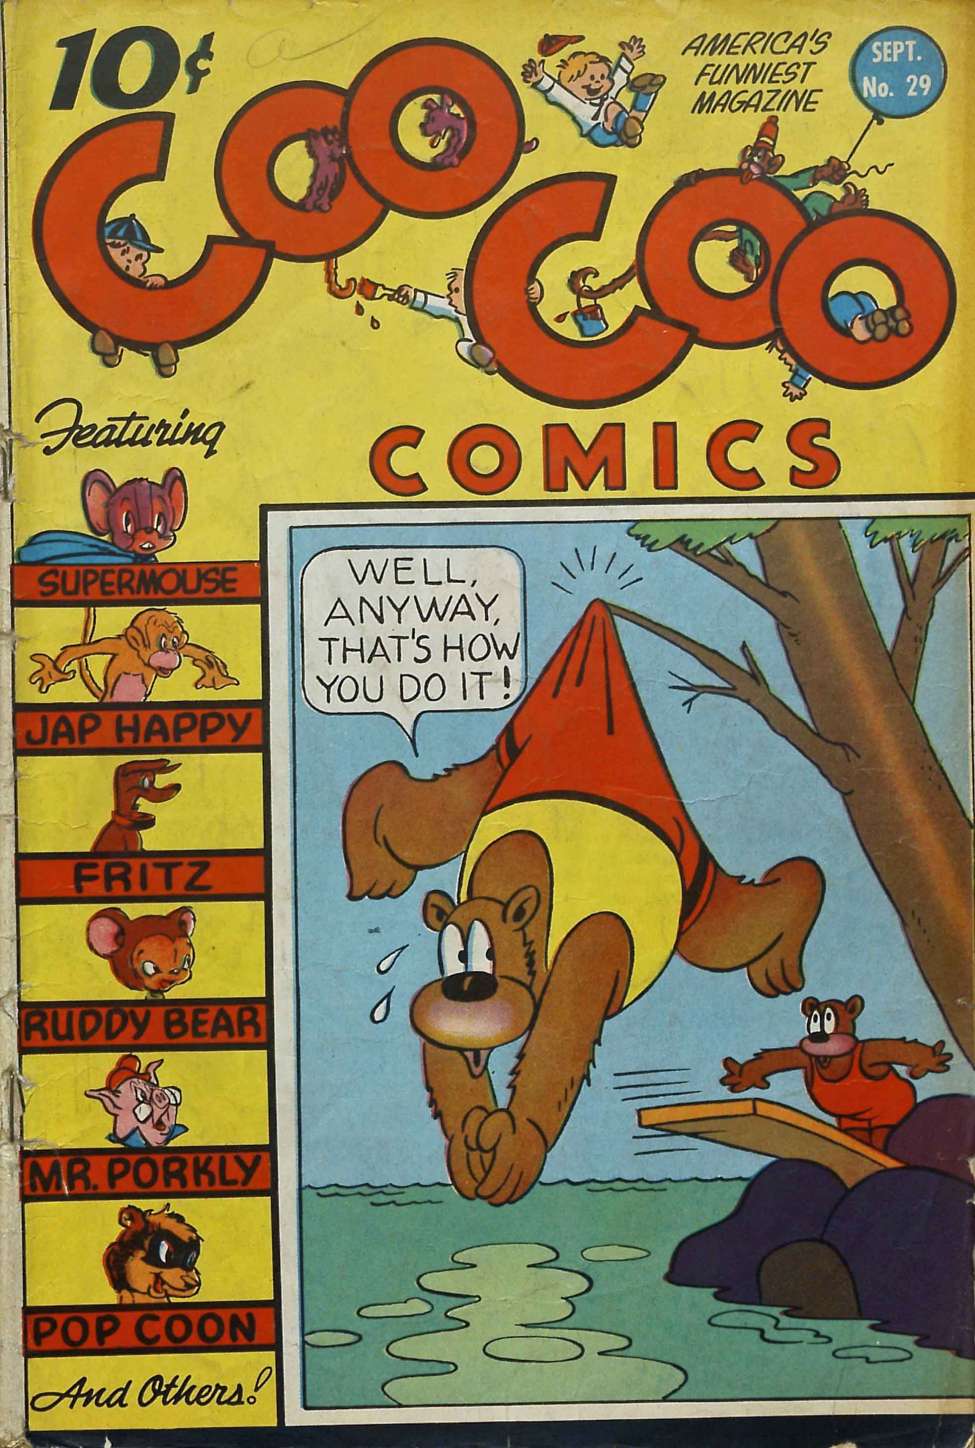 Book Cover For Coo Coo Comics 29